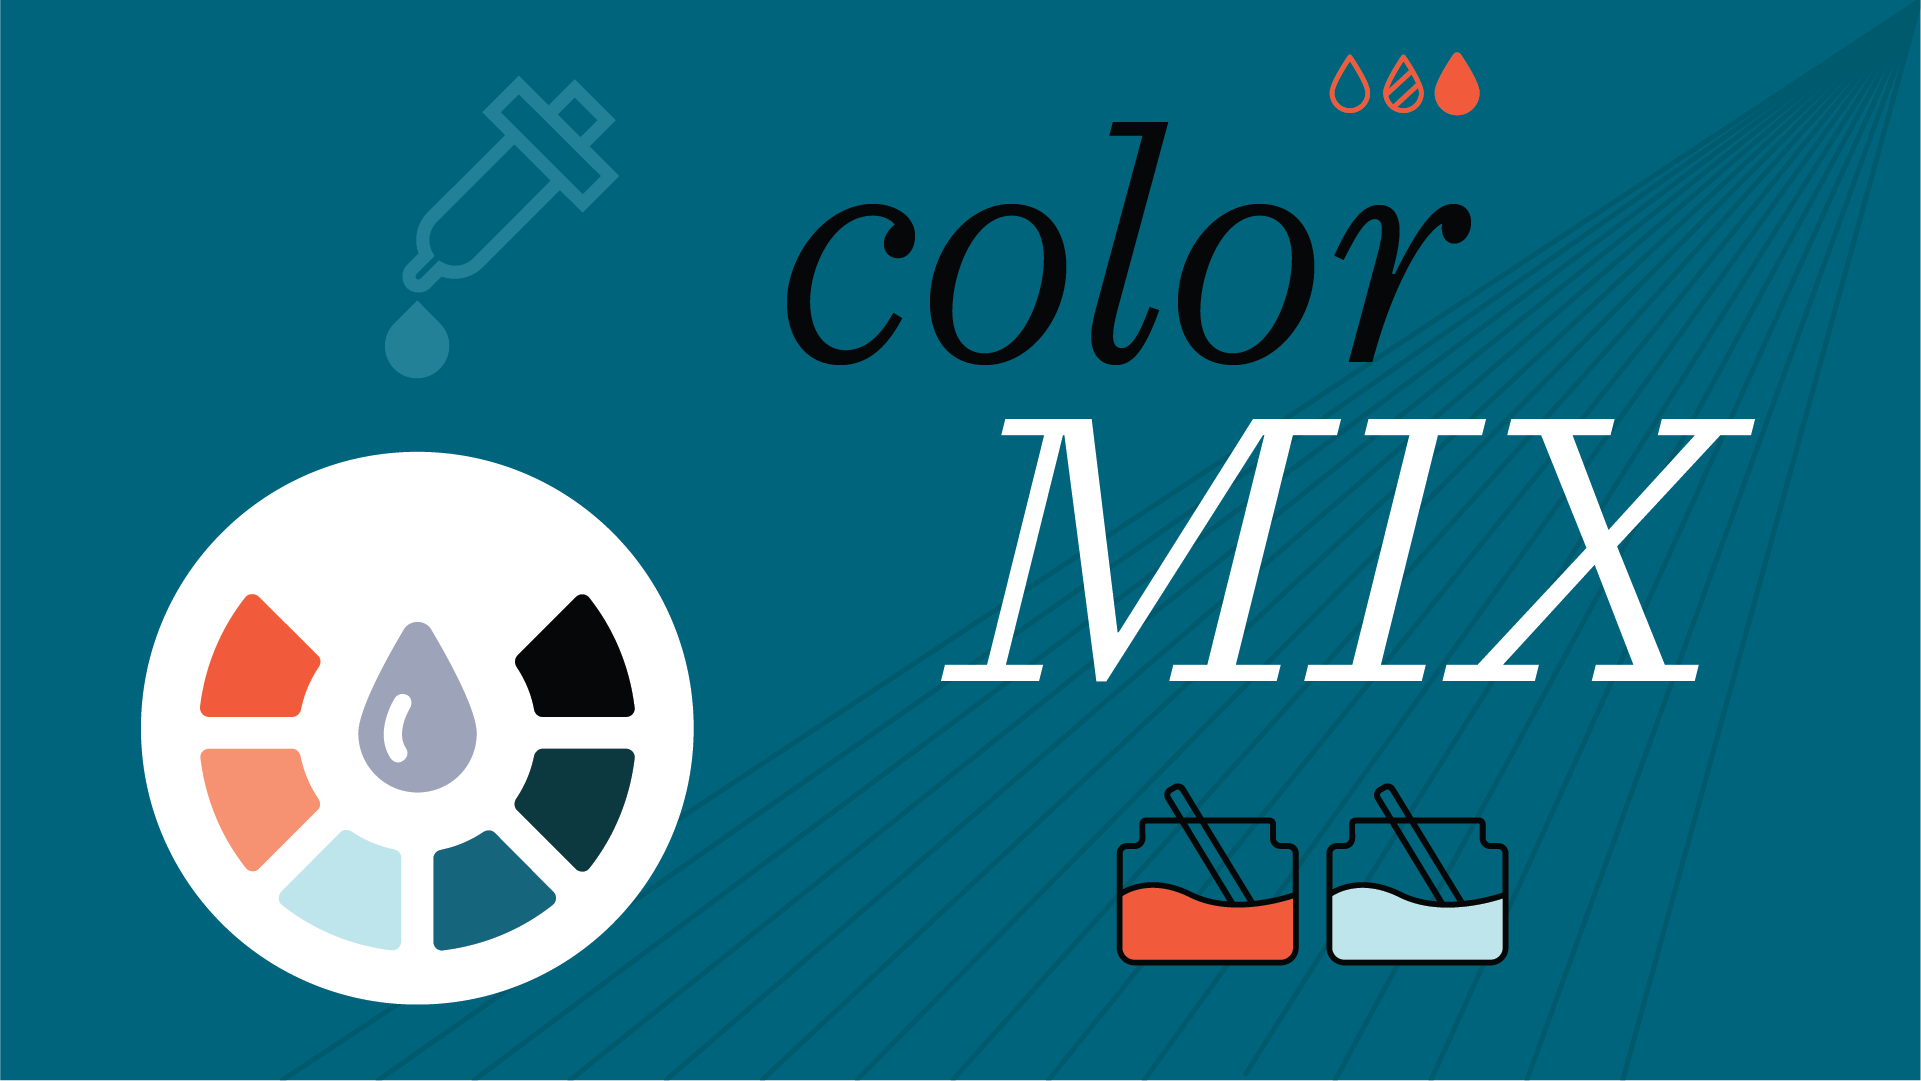 Graphic illustration of paint dropper and color wheel with words "Color Mix"